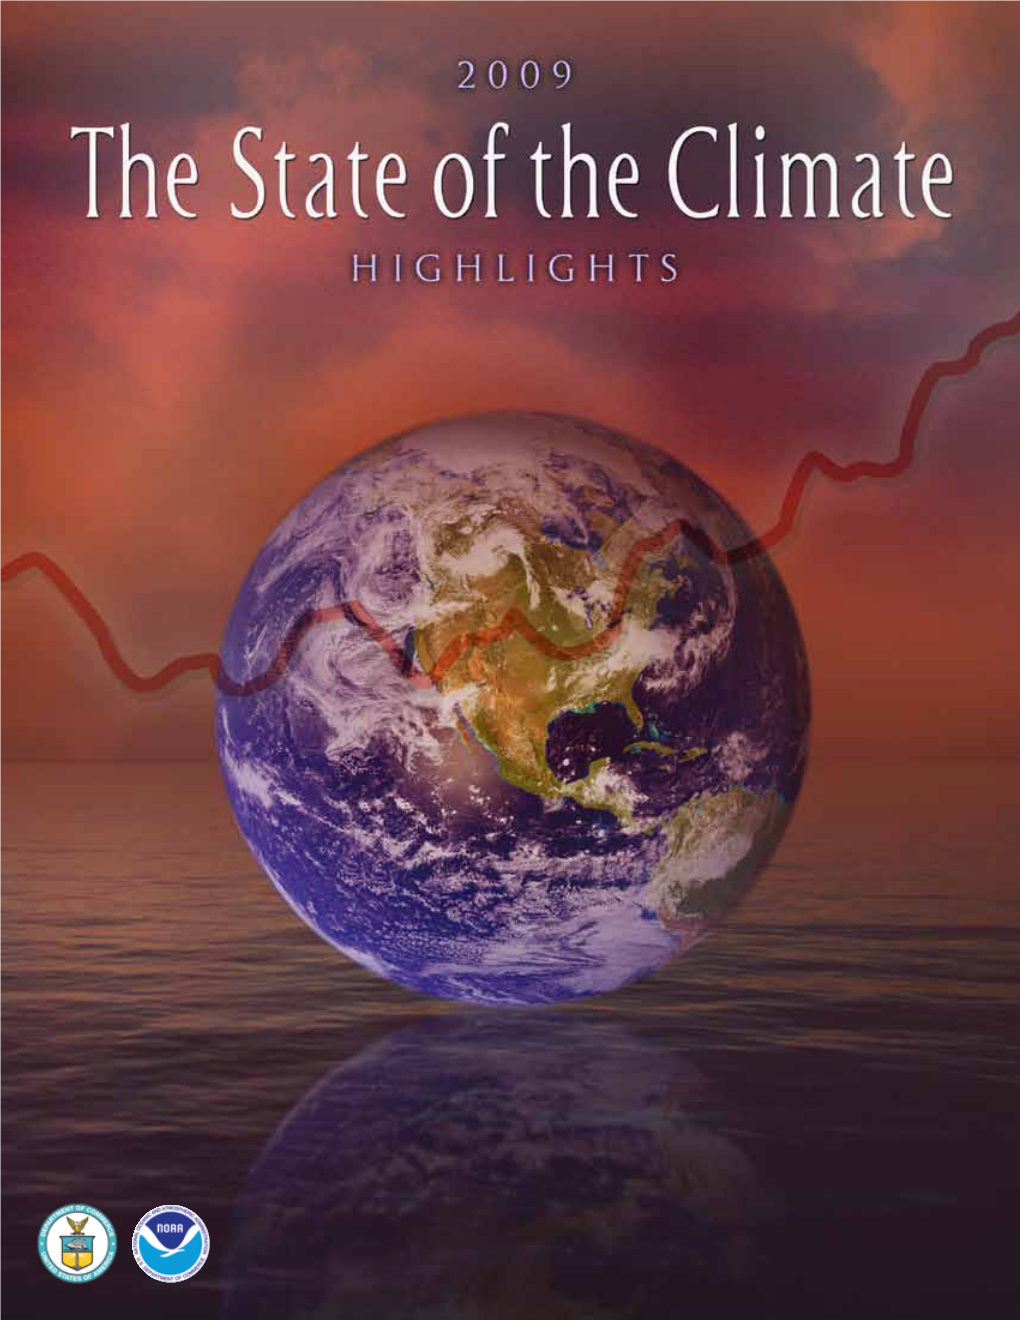 The State of the Climate